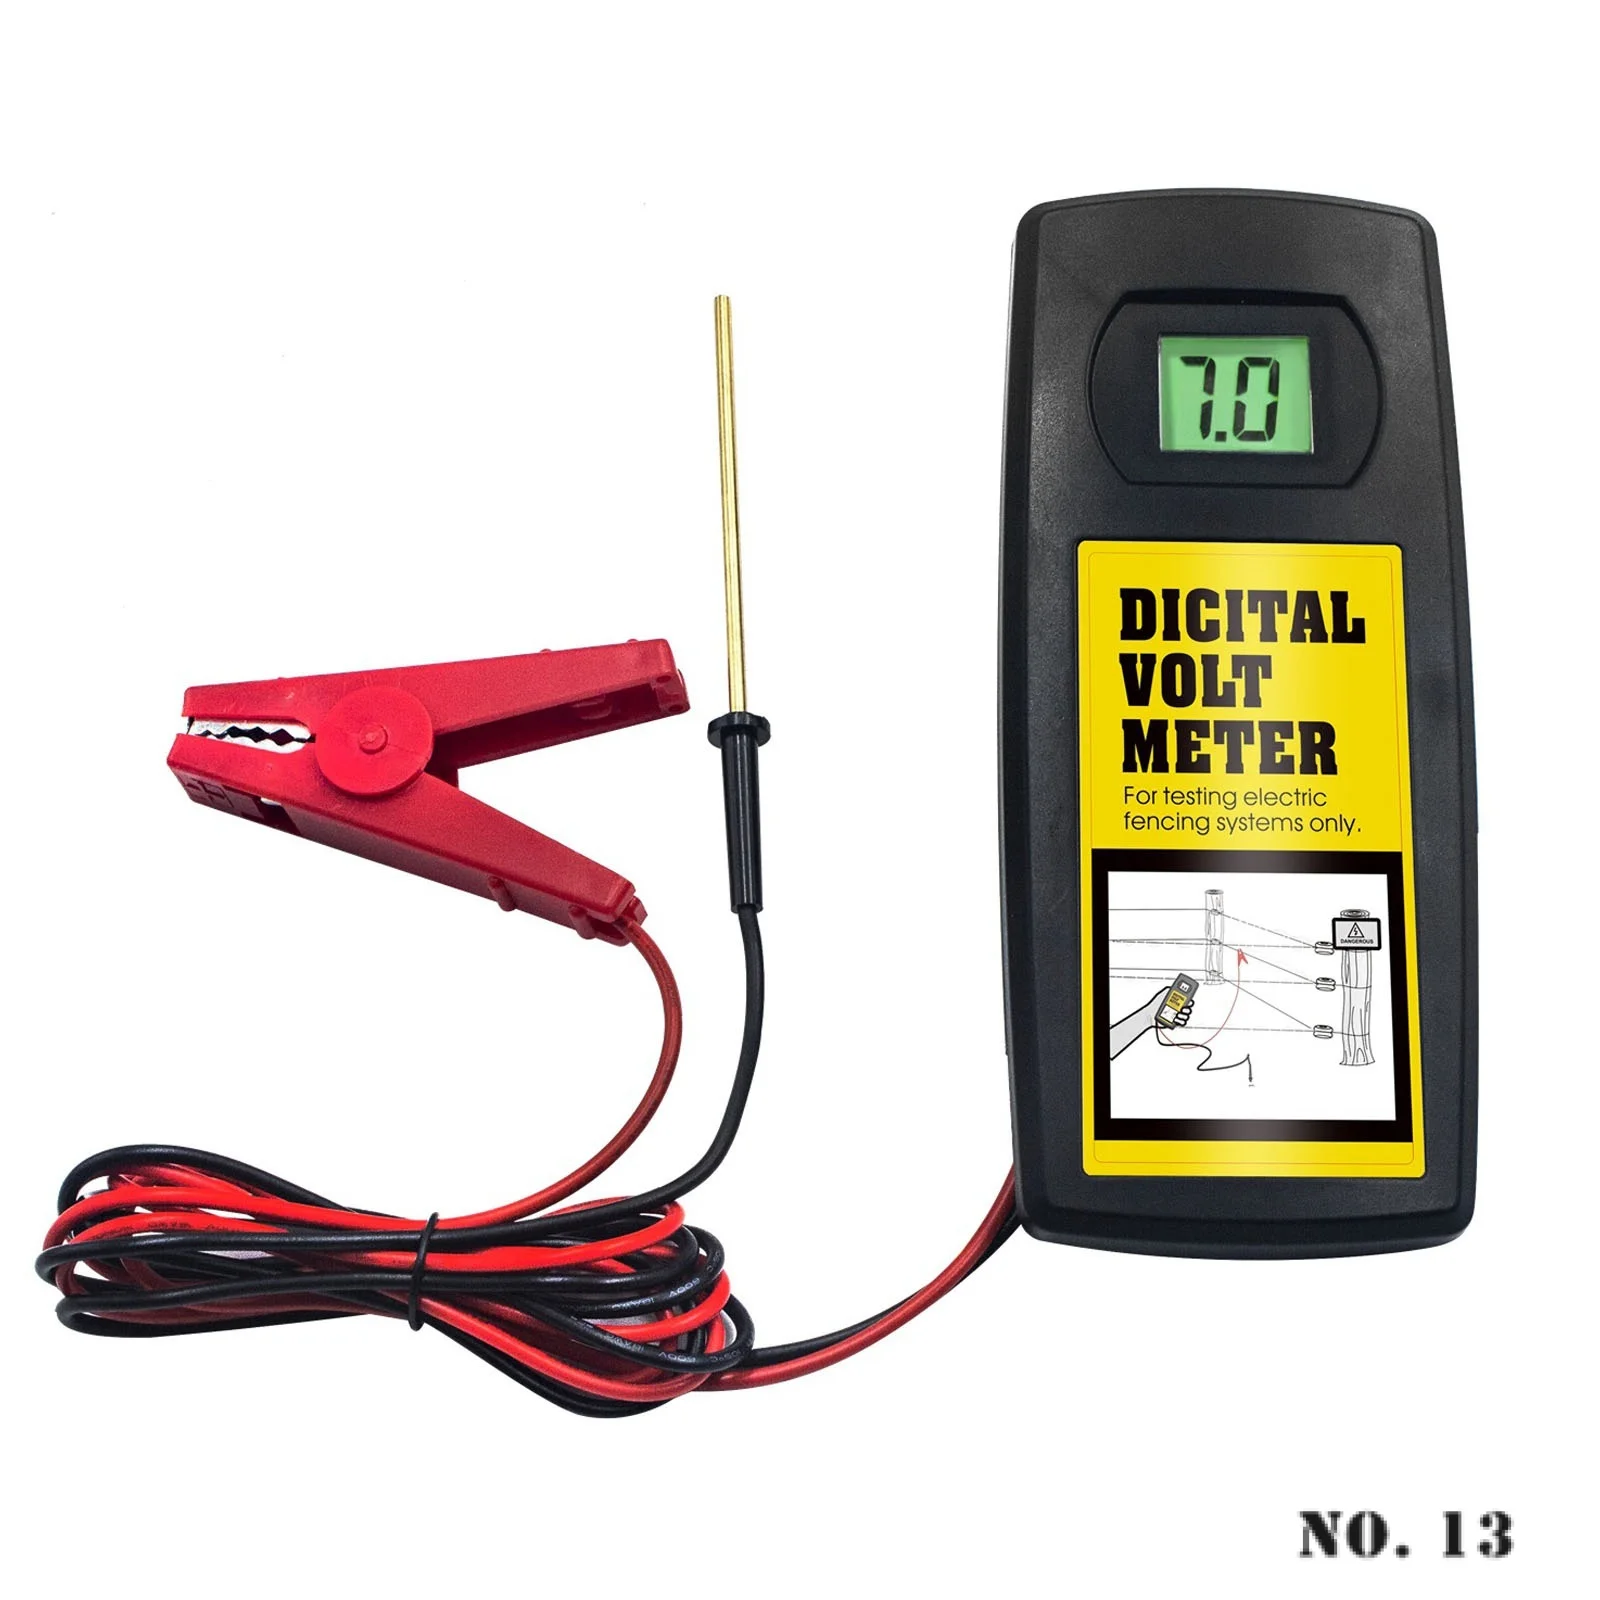 

Electronic Fence Pressure Gauge 9.9KV Multi-model Cattle Farm Pasture with Backlight Voltage Detector Farm Safety Tools